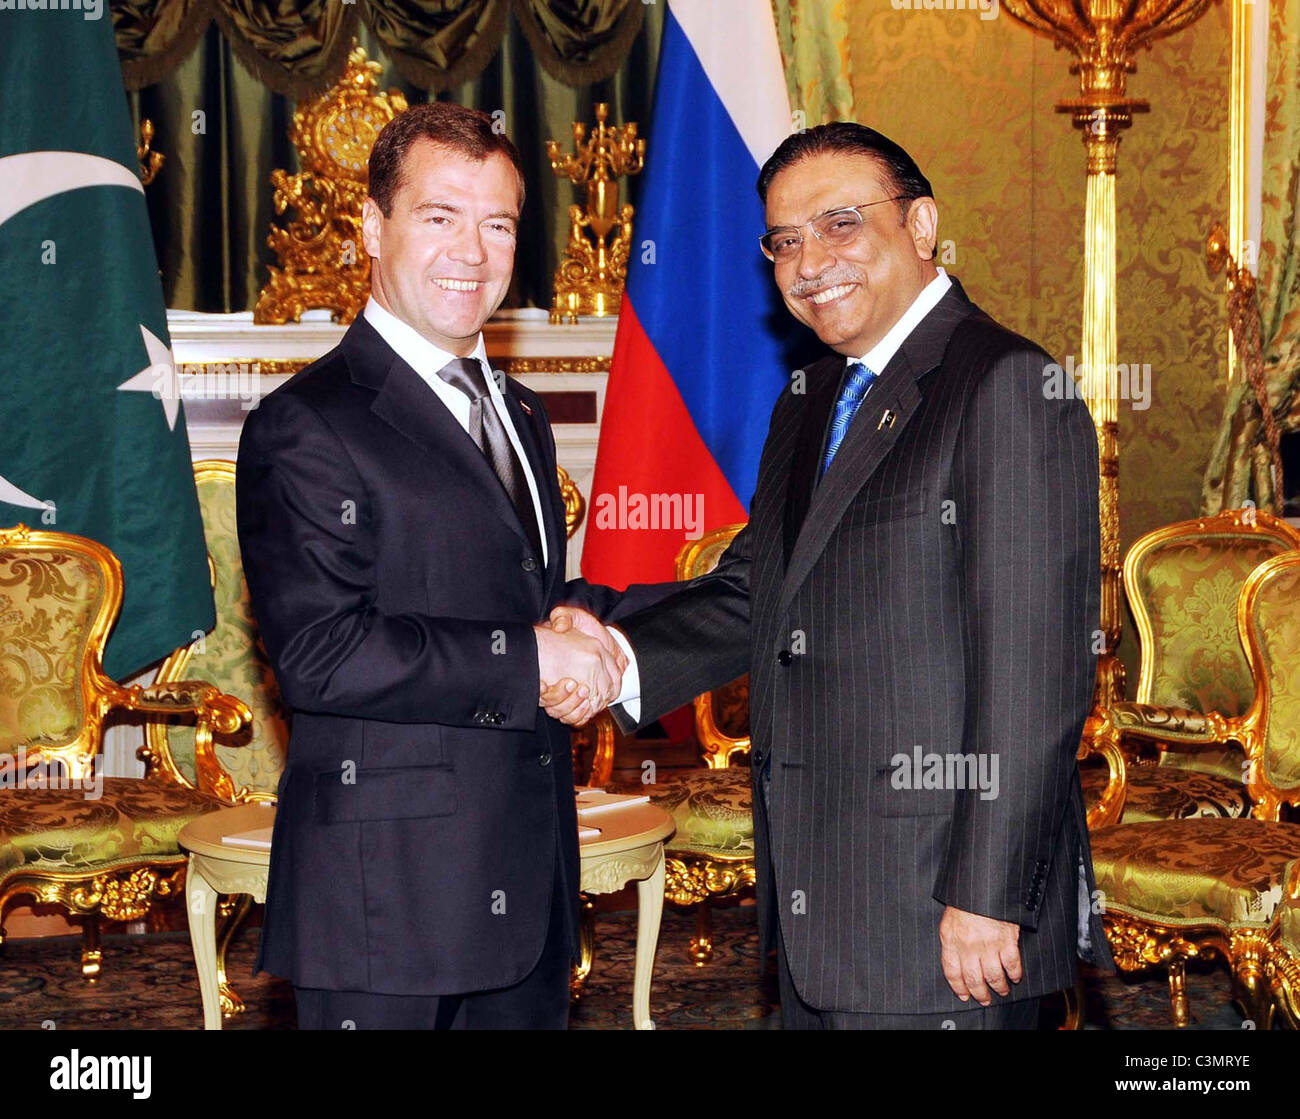 President, Asif Ali Zardari being received by his Russian counterpart, Dimitry Medvedev at Kremlin in Moscow Stock Photo